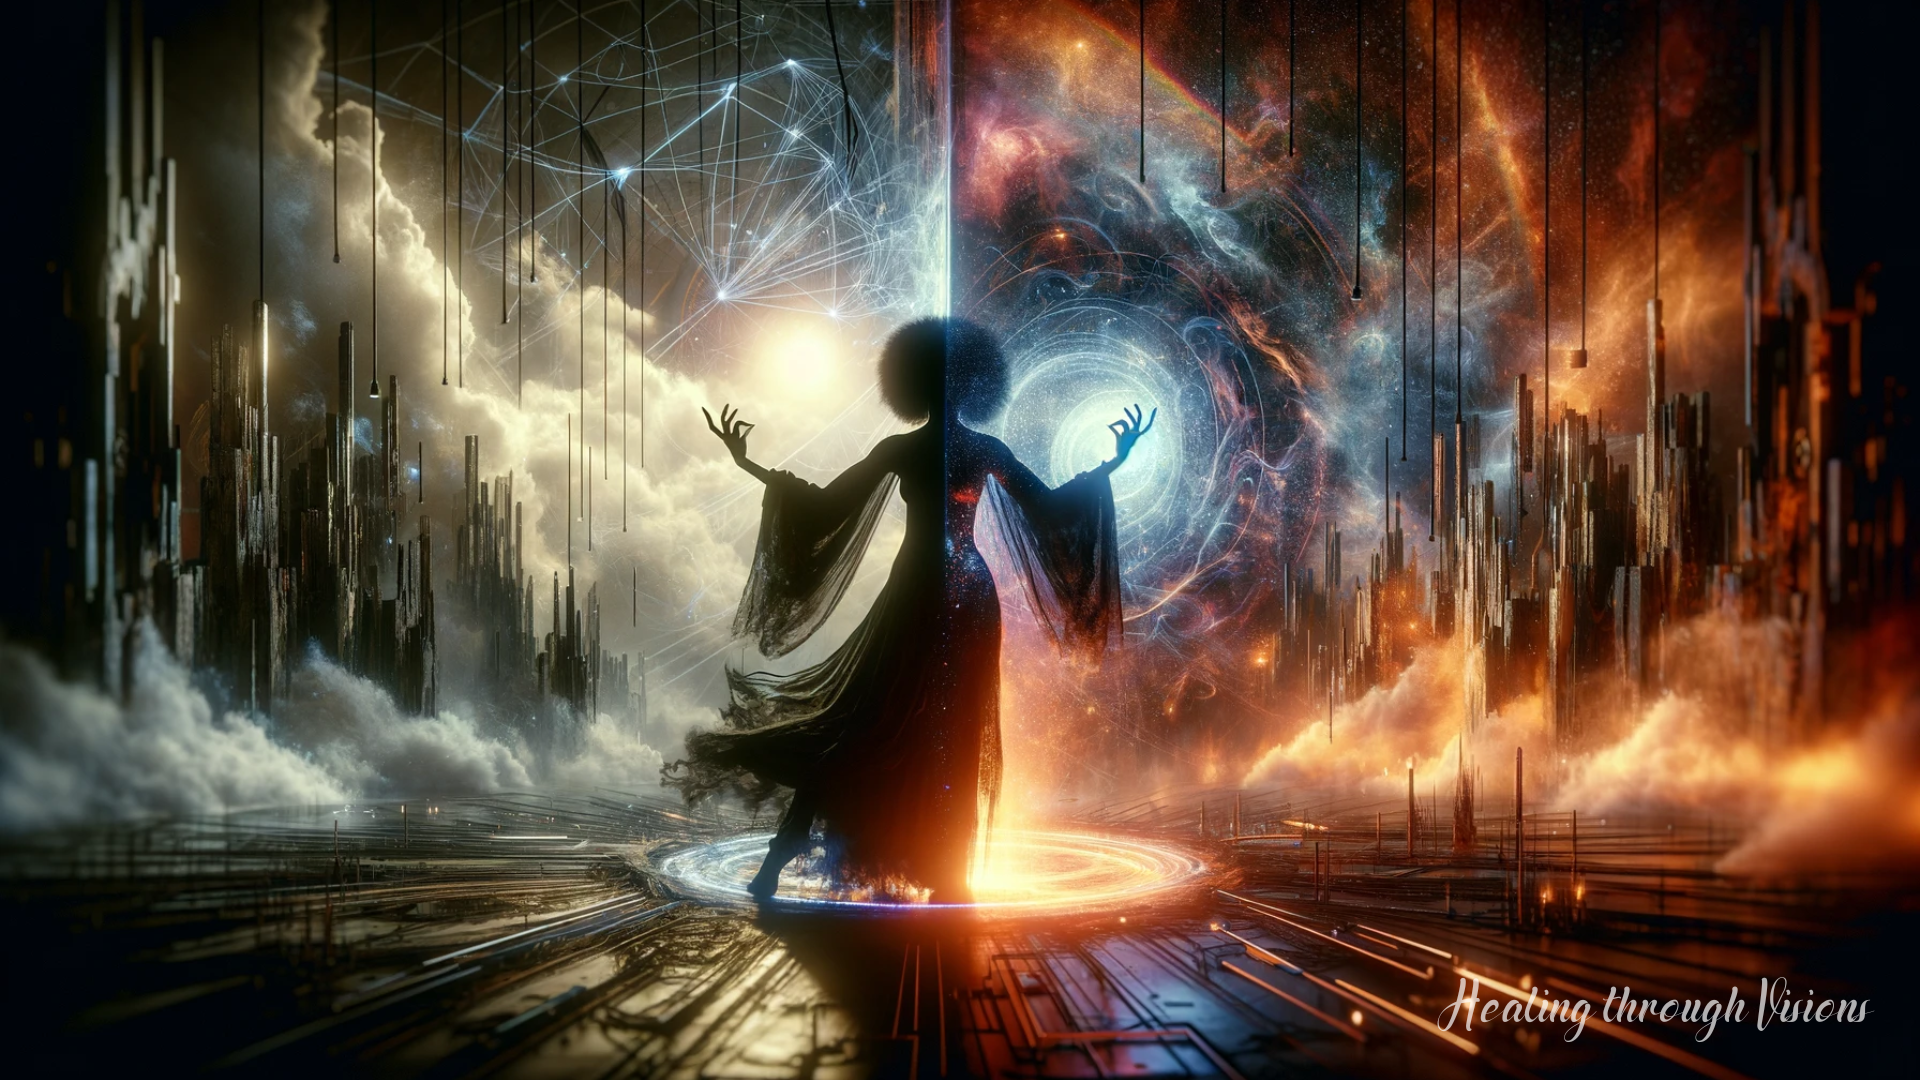 An image capturing the essence of releasing rage and integrating light and dark into the One. In the foreground, the silhouette of a Black woman Shaman, embodying strength and spiritual depth. She stands in a surreal setting, a fusion of light and shadow, symbolizing the merging of opposing energies. The environment is dystopian yet magical, with an intricate play of light and darkness, reflecting the theme of transformation and balance.